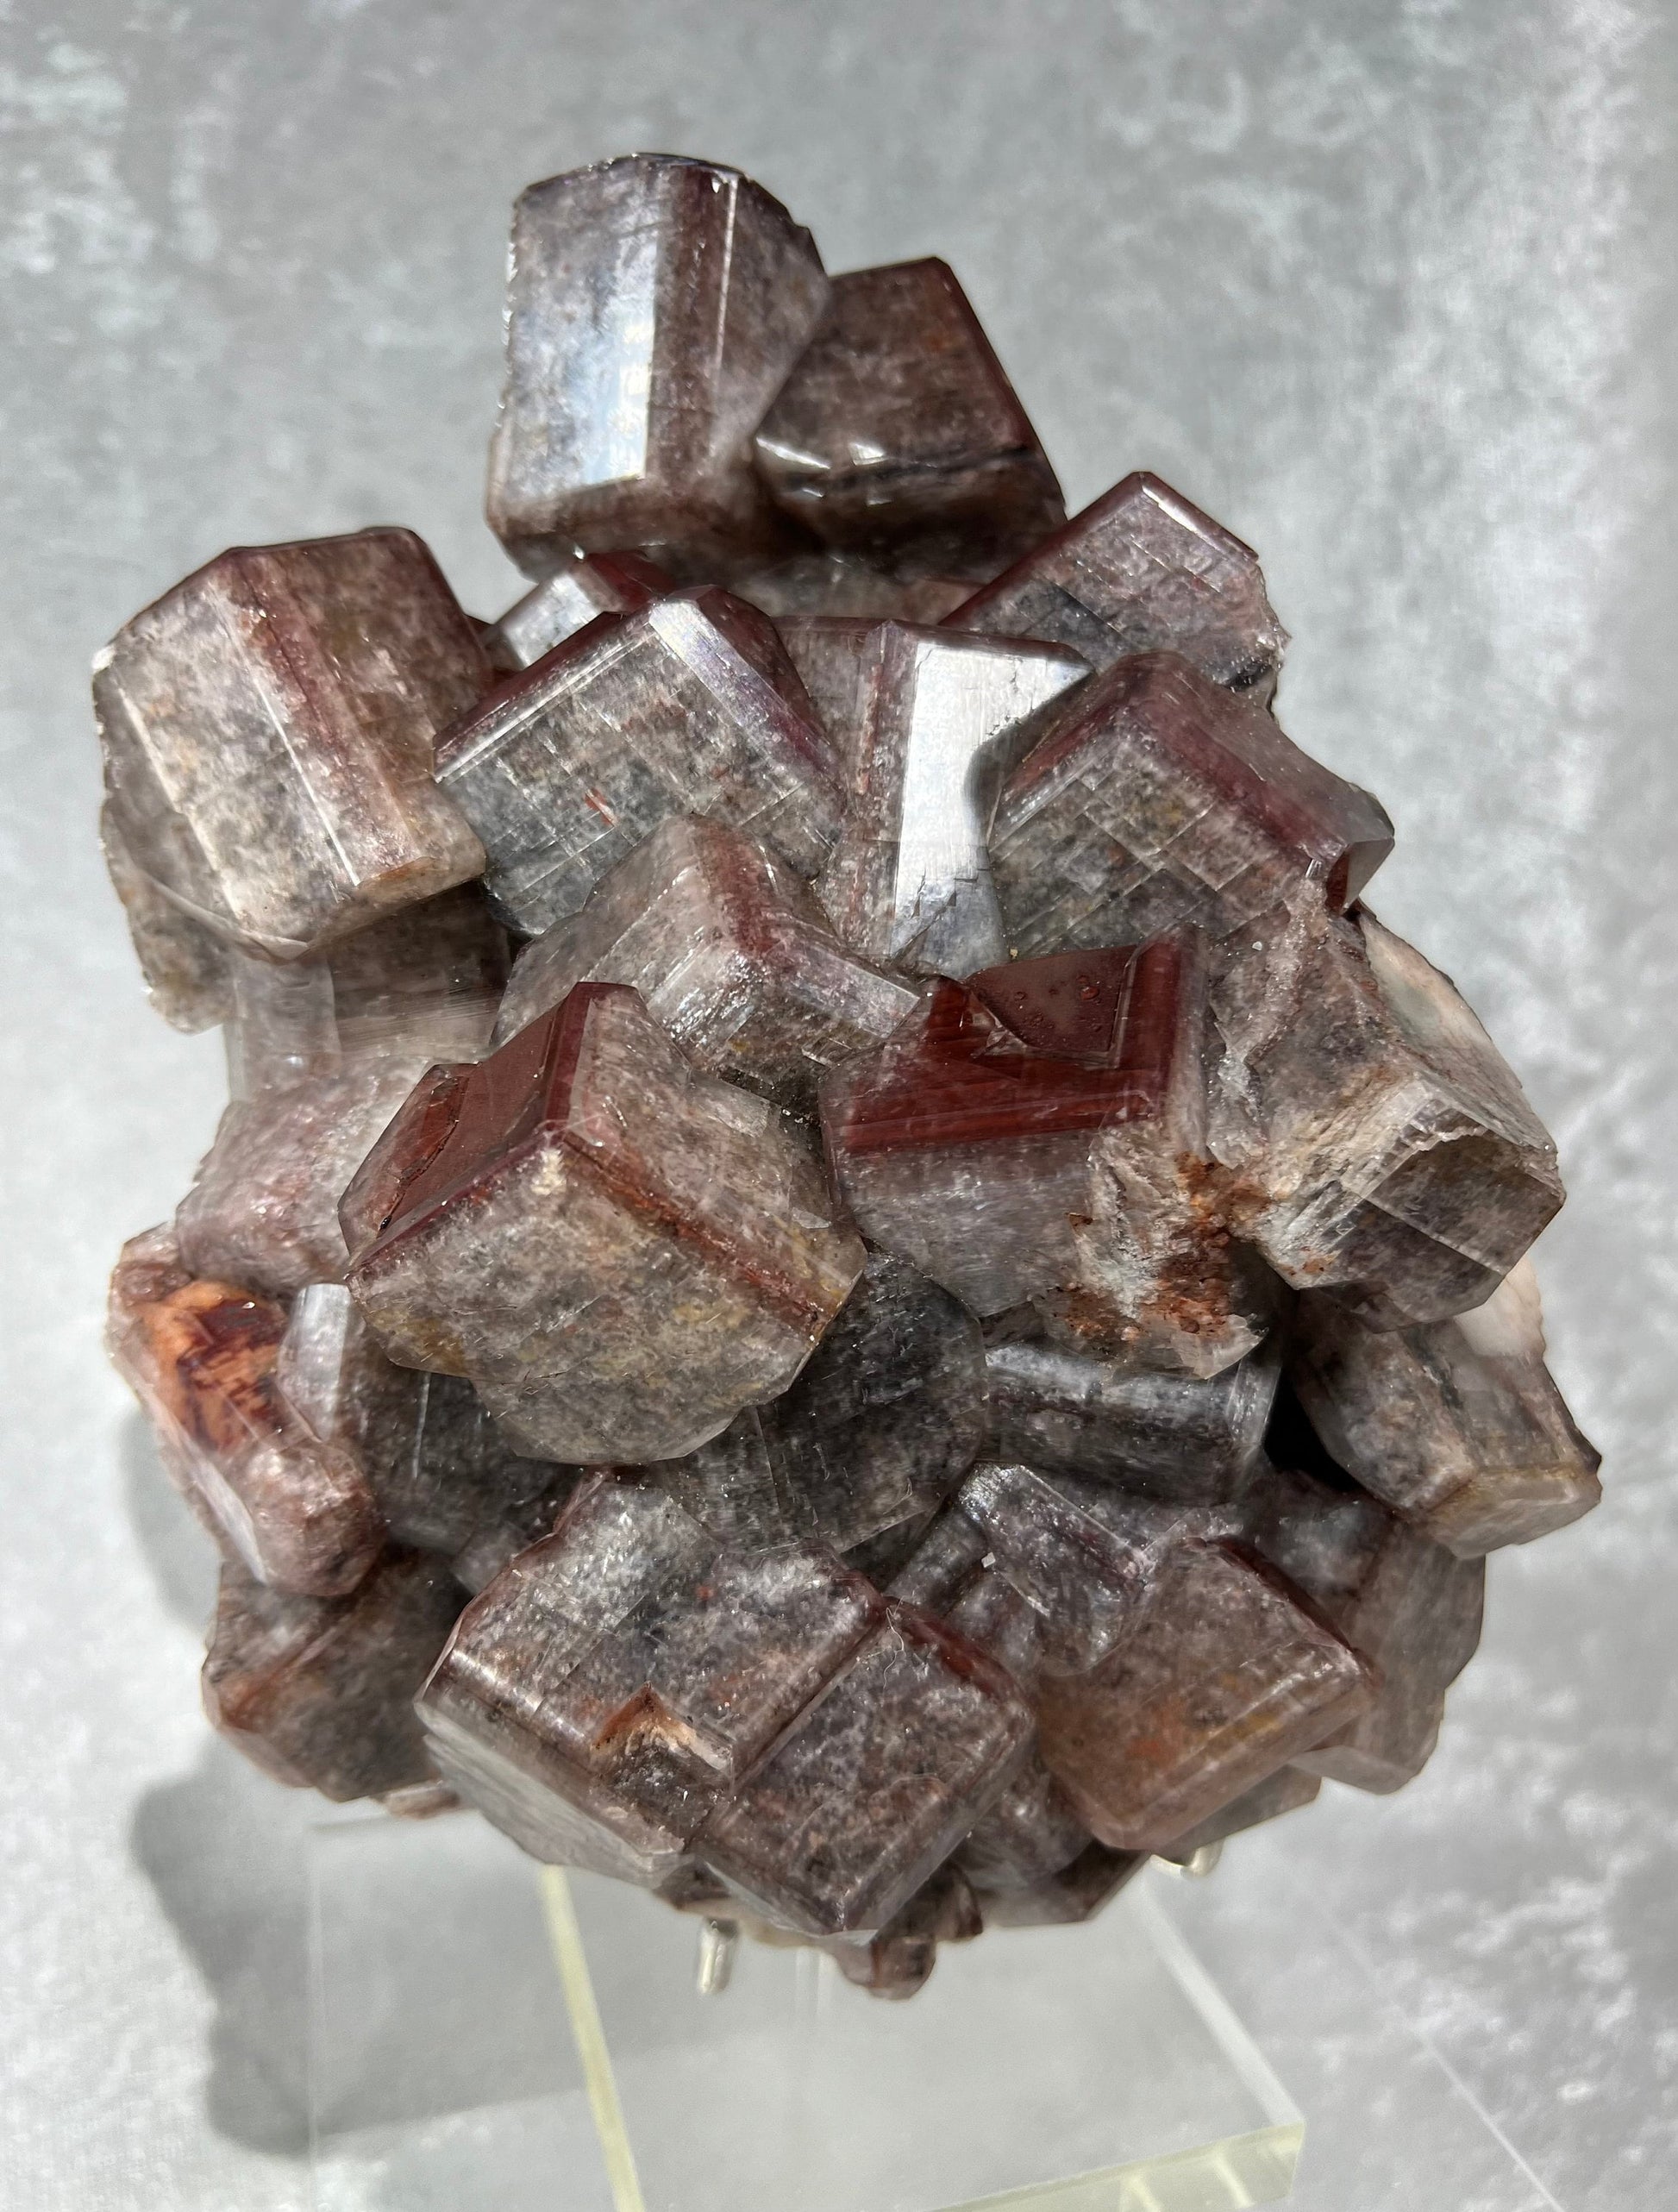 XL Chocolate Calcite Specimen. 5.2 lbs. Very High Quality. Stunning Cubic Hematite Calcite Cluster. Incredible Crystal Display Specimen.